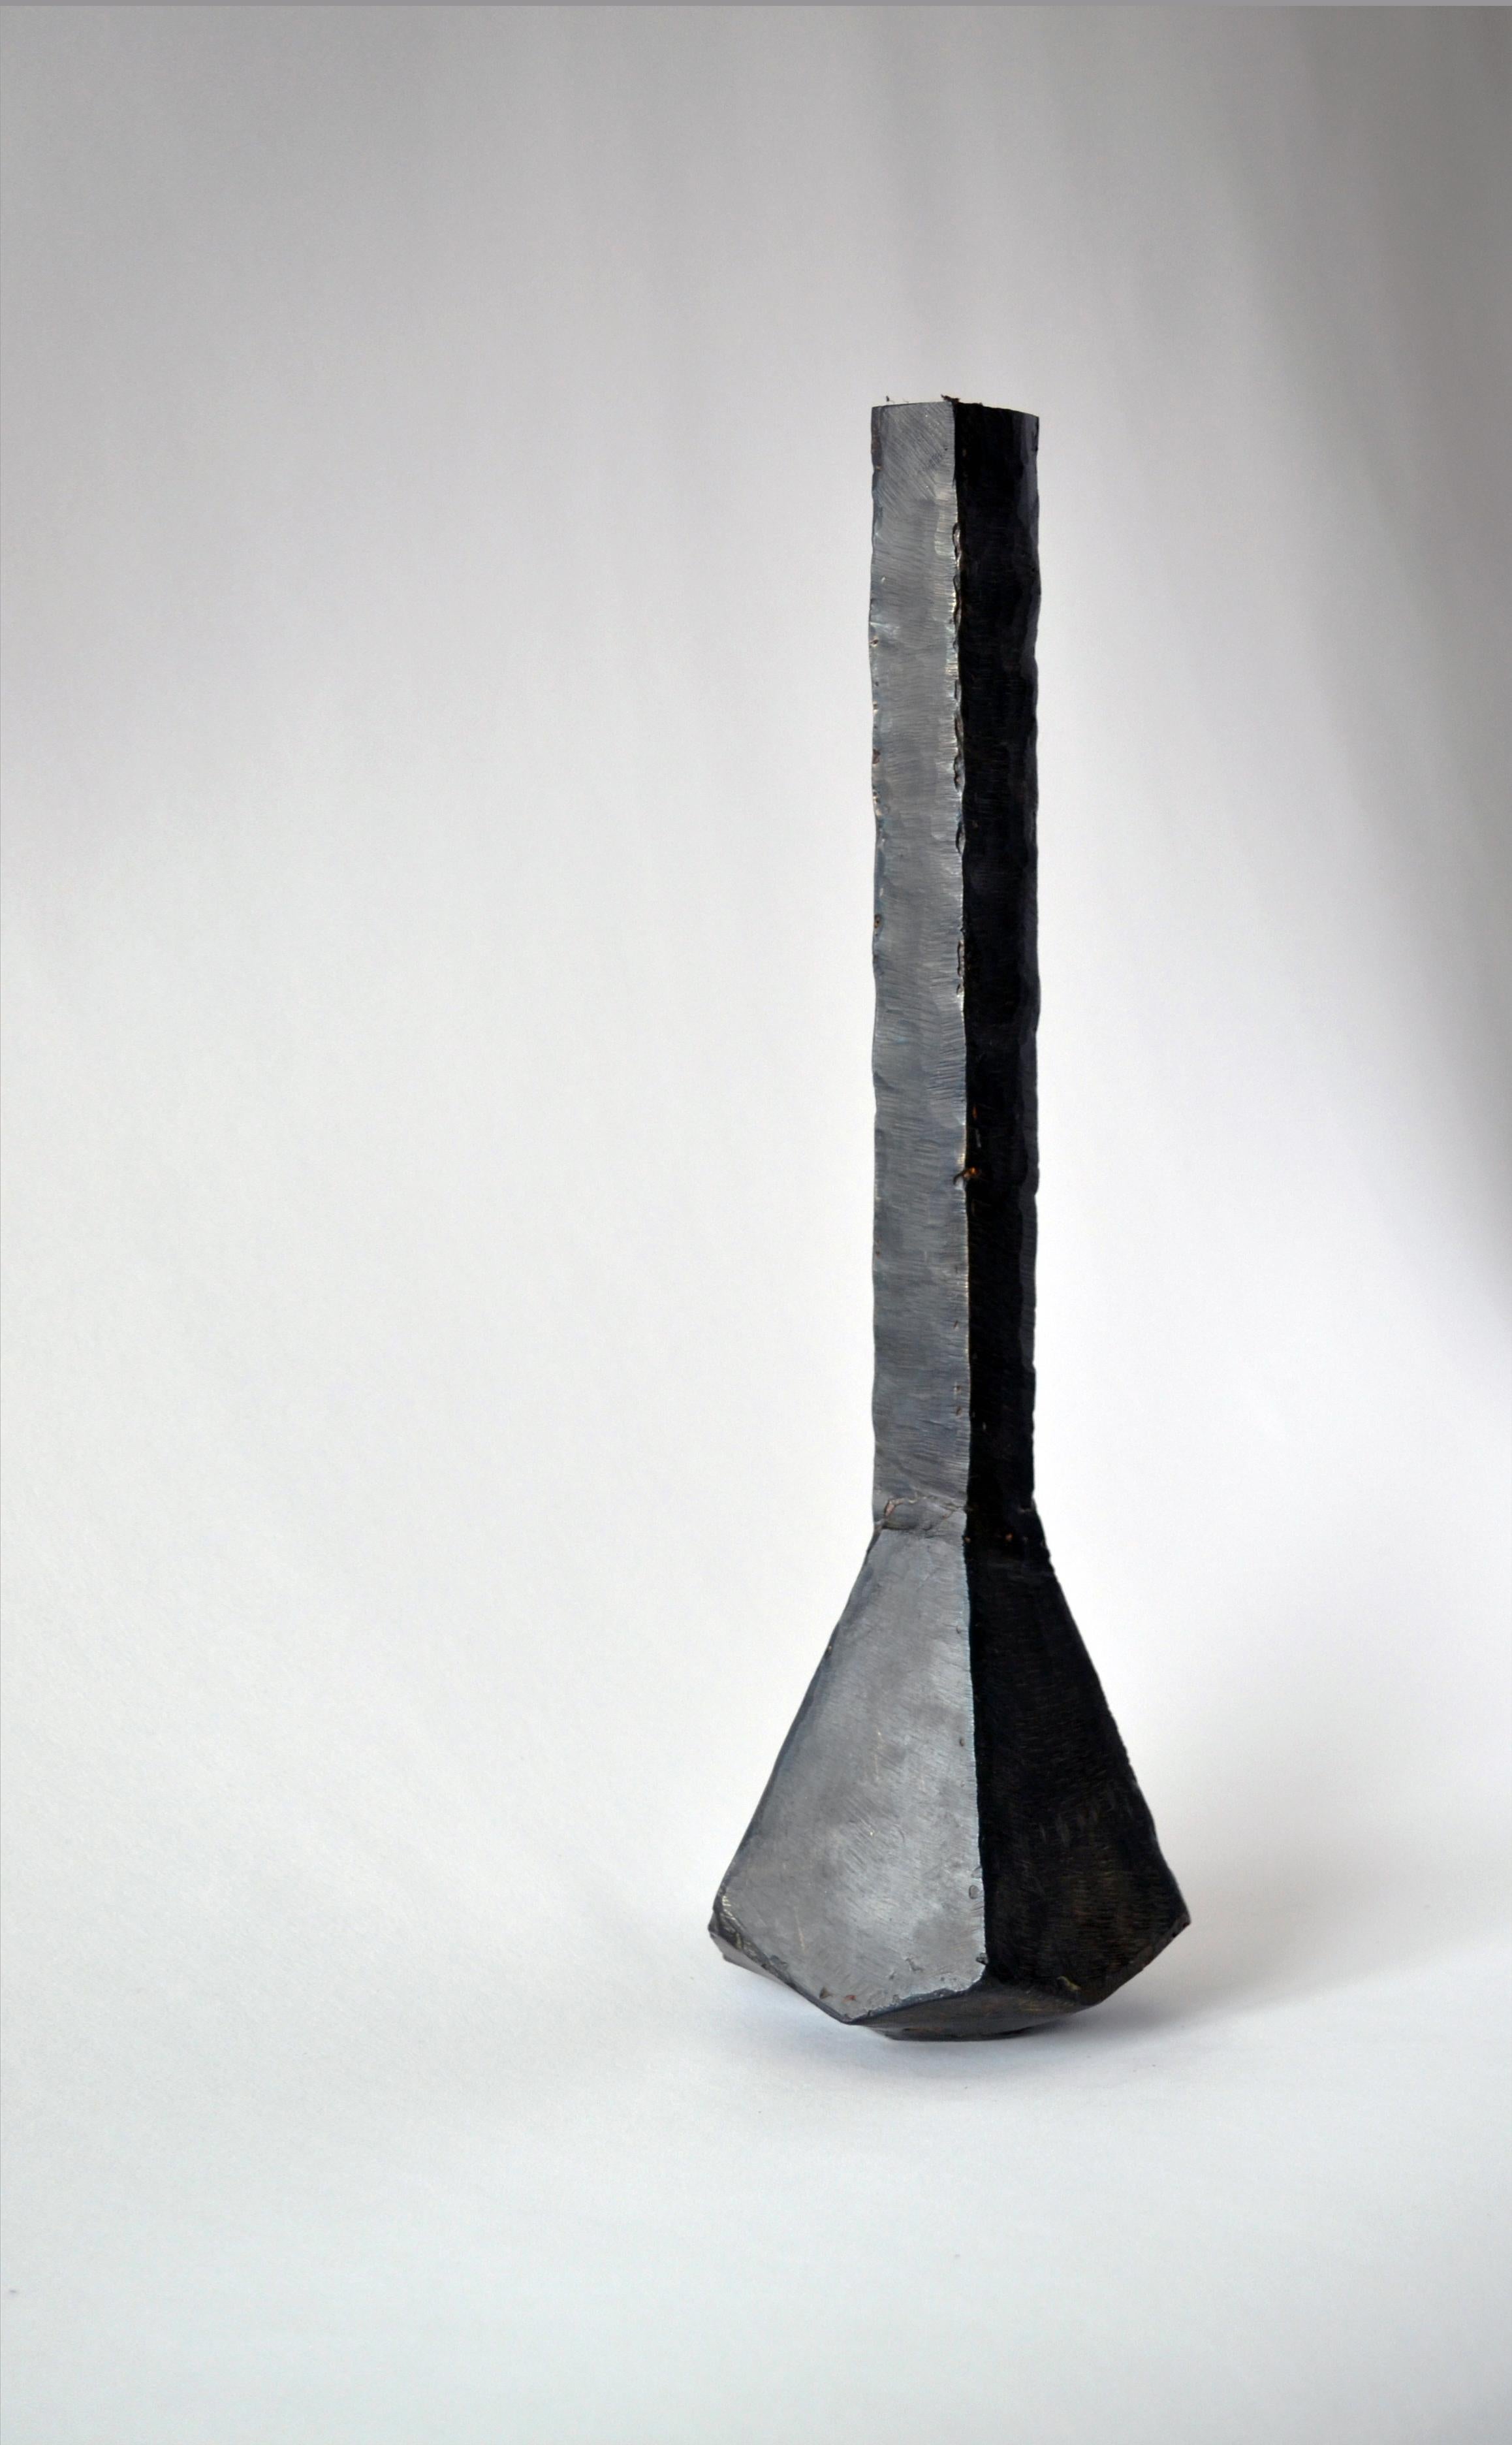 Vessel No 2.
J.M. Szymanski
d. 2017
Blackened and waxed iron

This is a unique architectural object made entirely of iron. J.M. Szymanski uses a unique process of metal sculpting to achieve these dynamic facets. It is finished in a black wax.